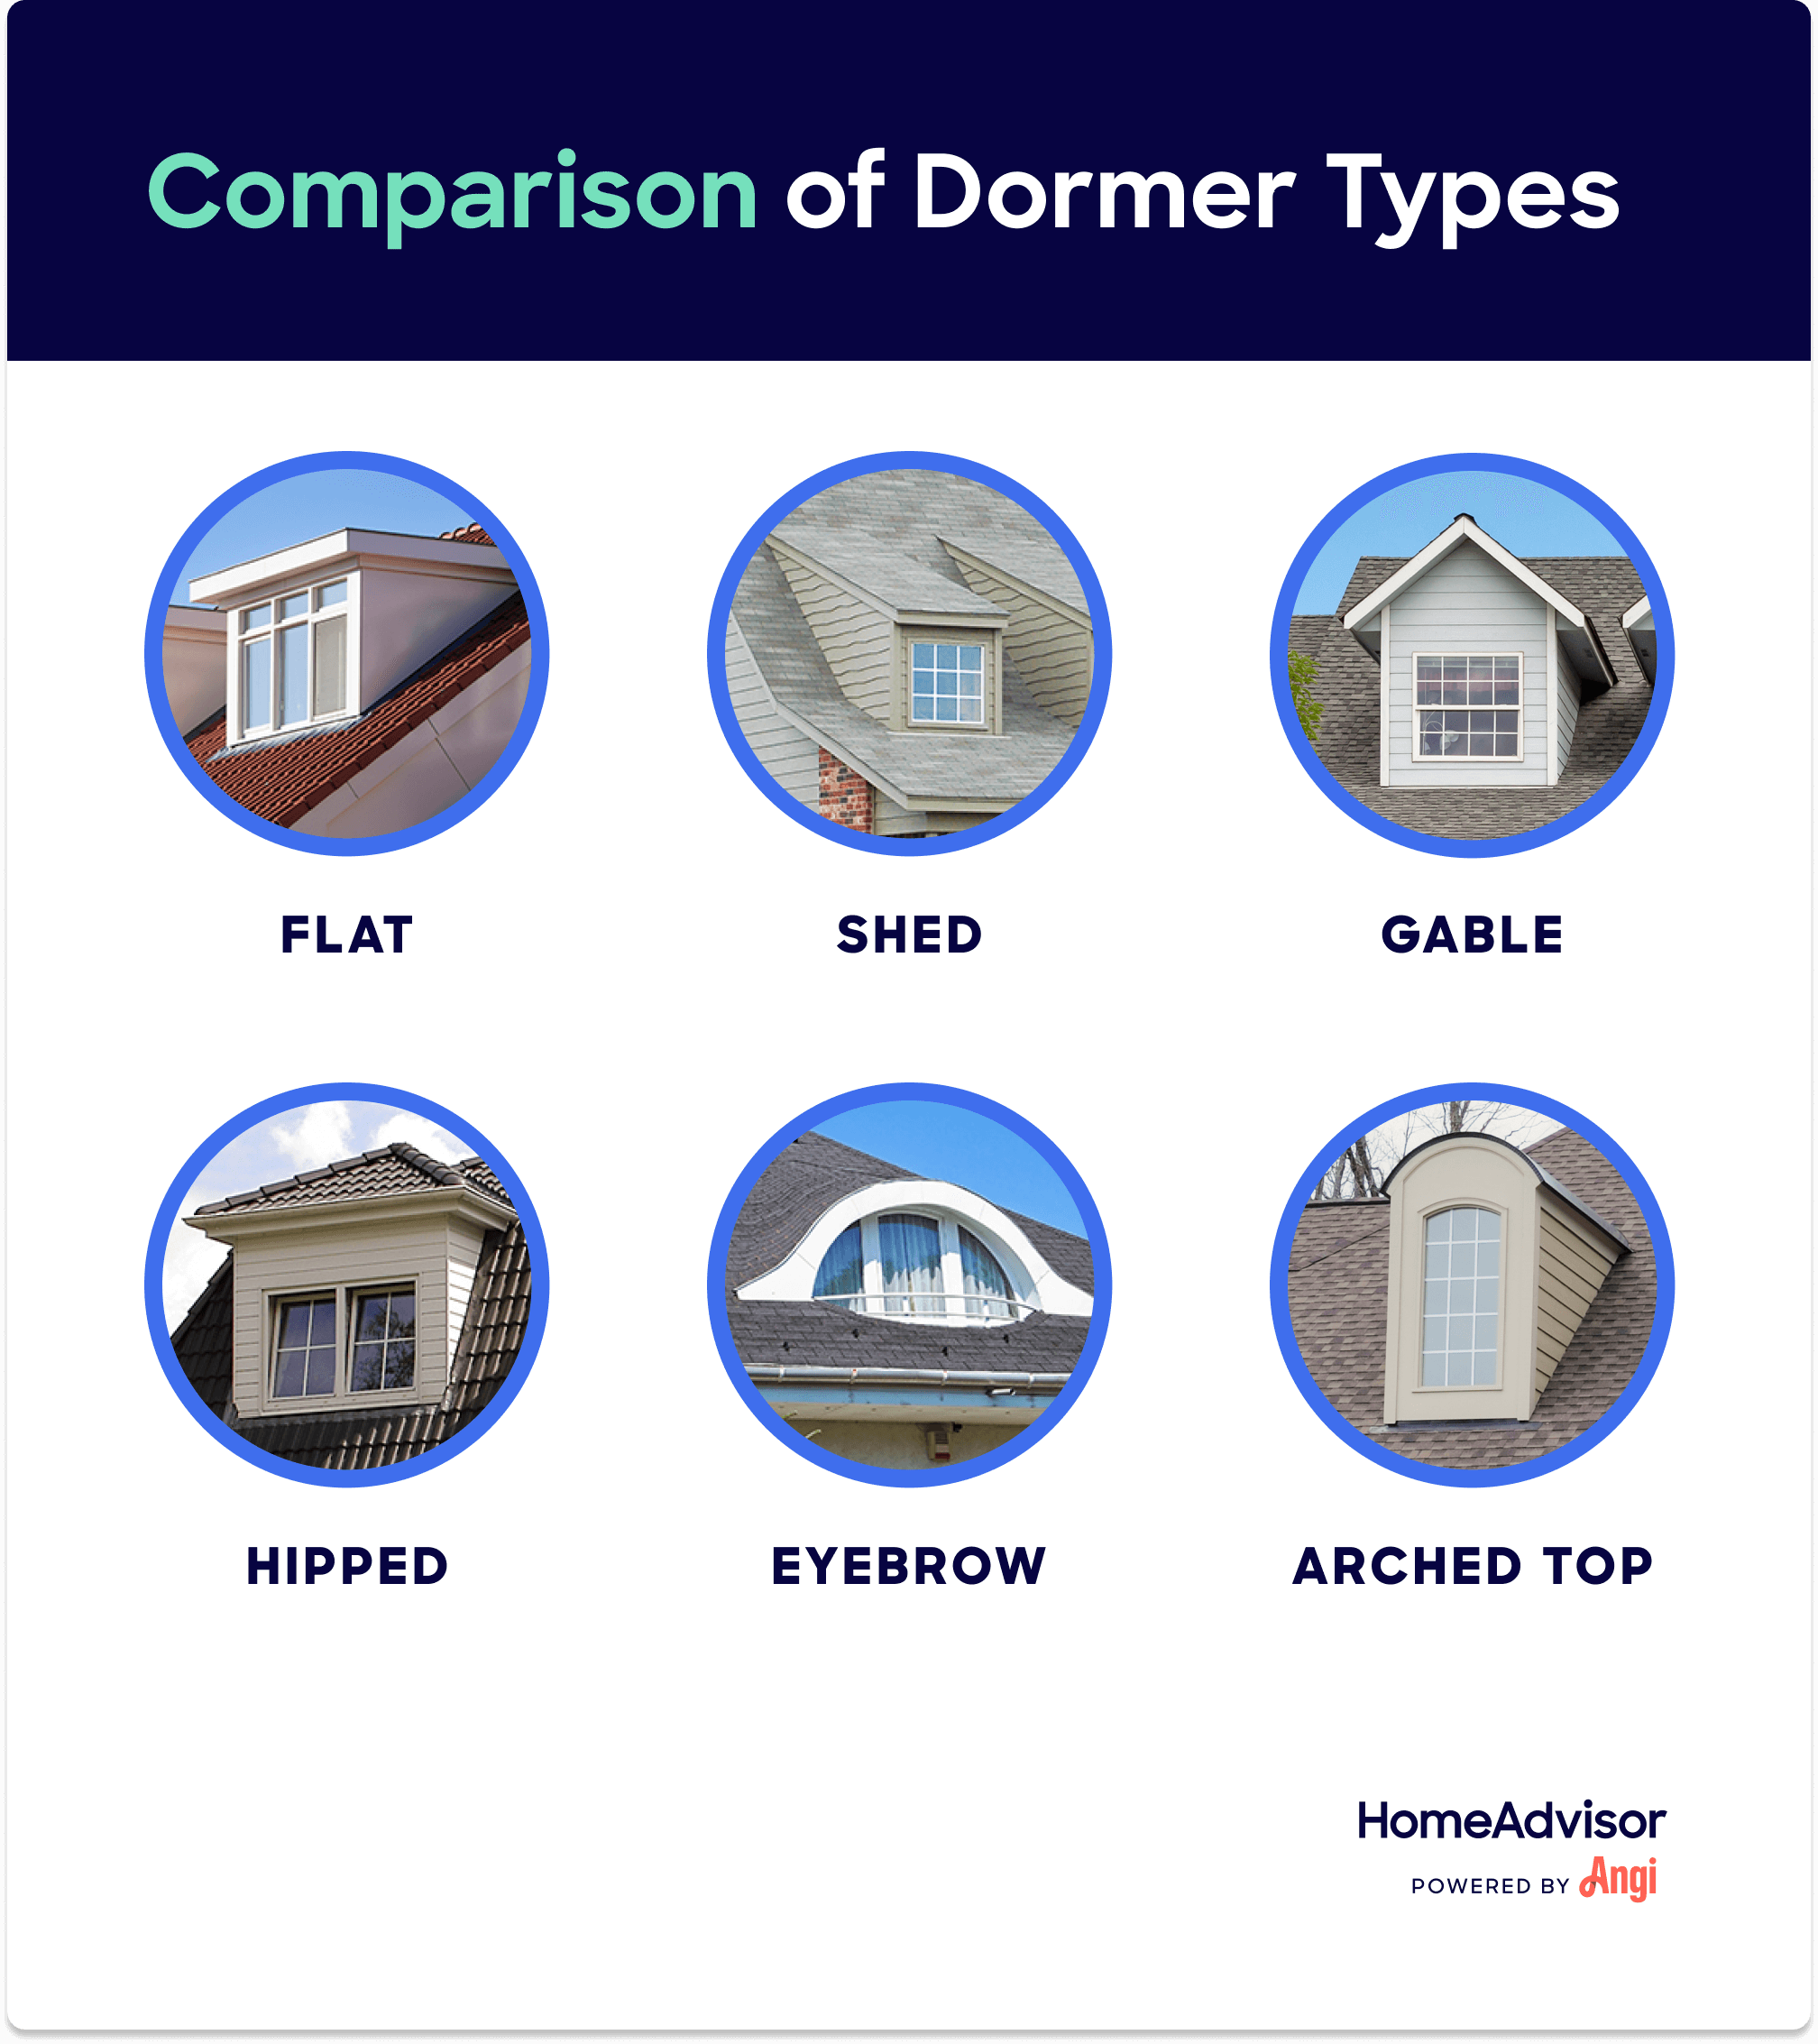 How Much Does It Cost to Install a Dormer?